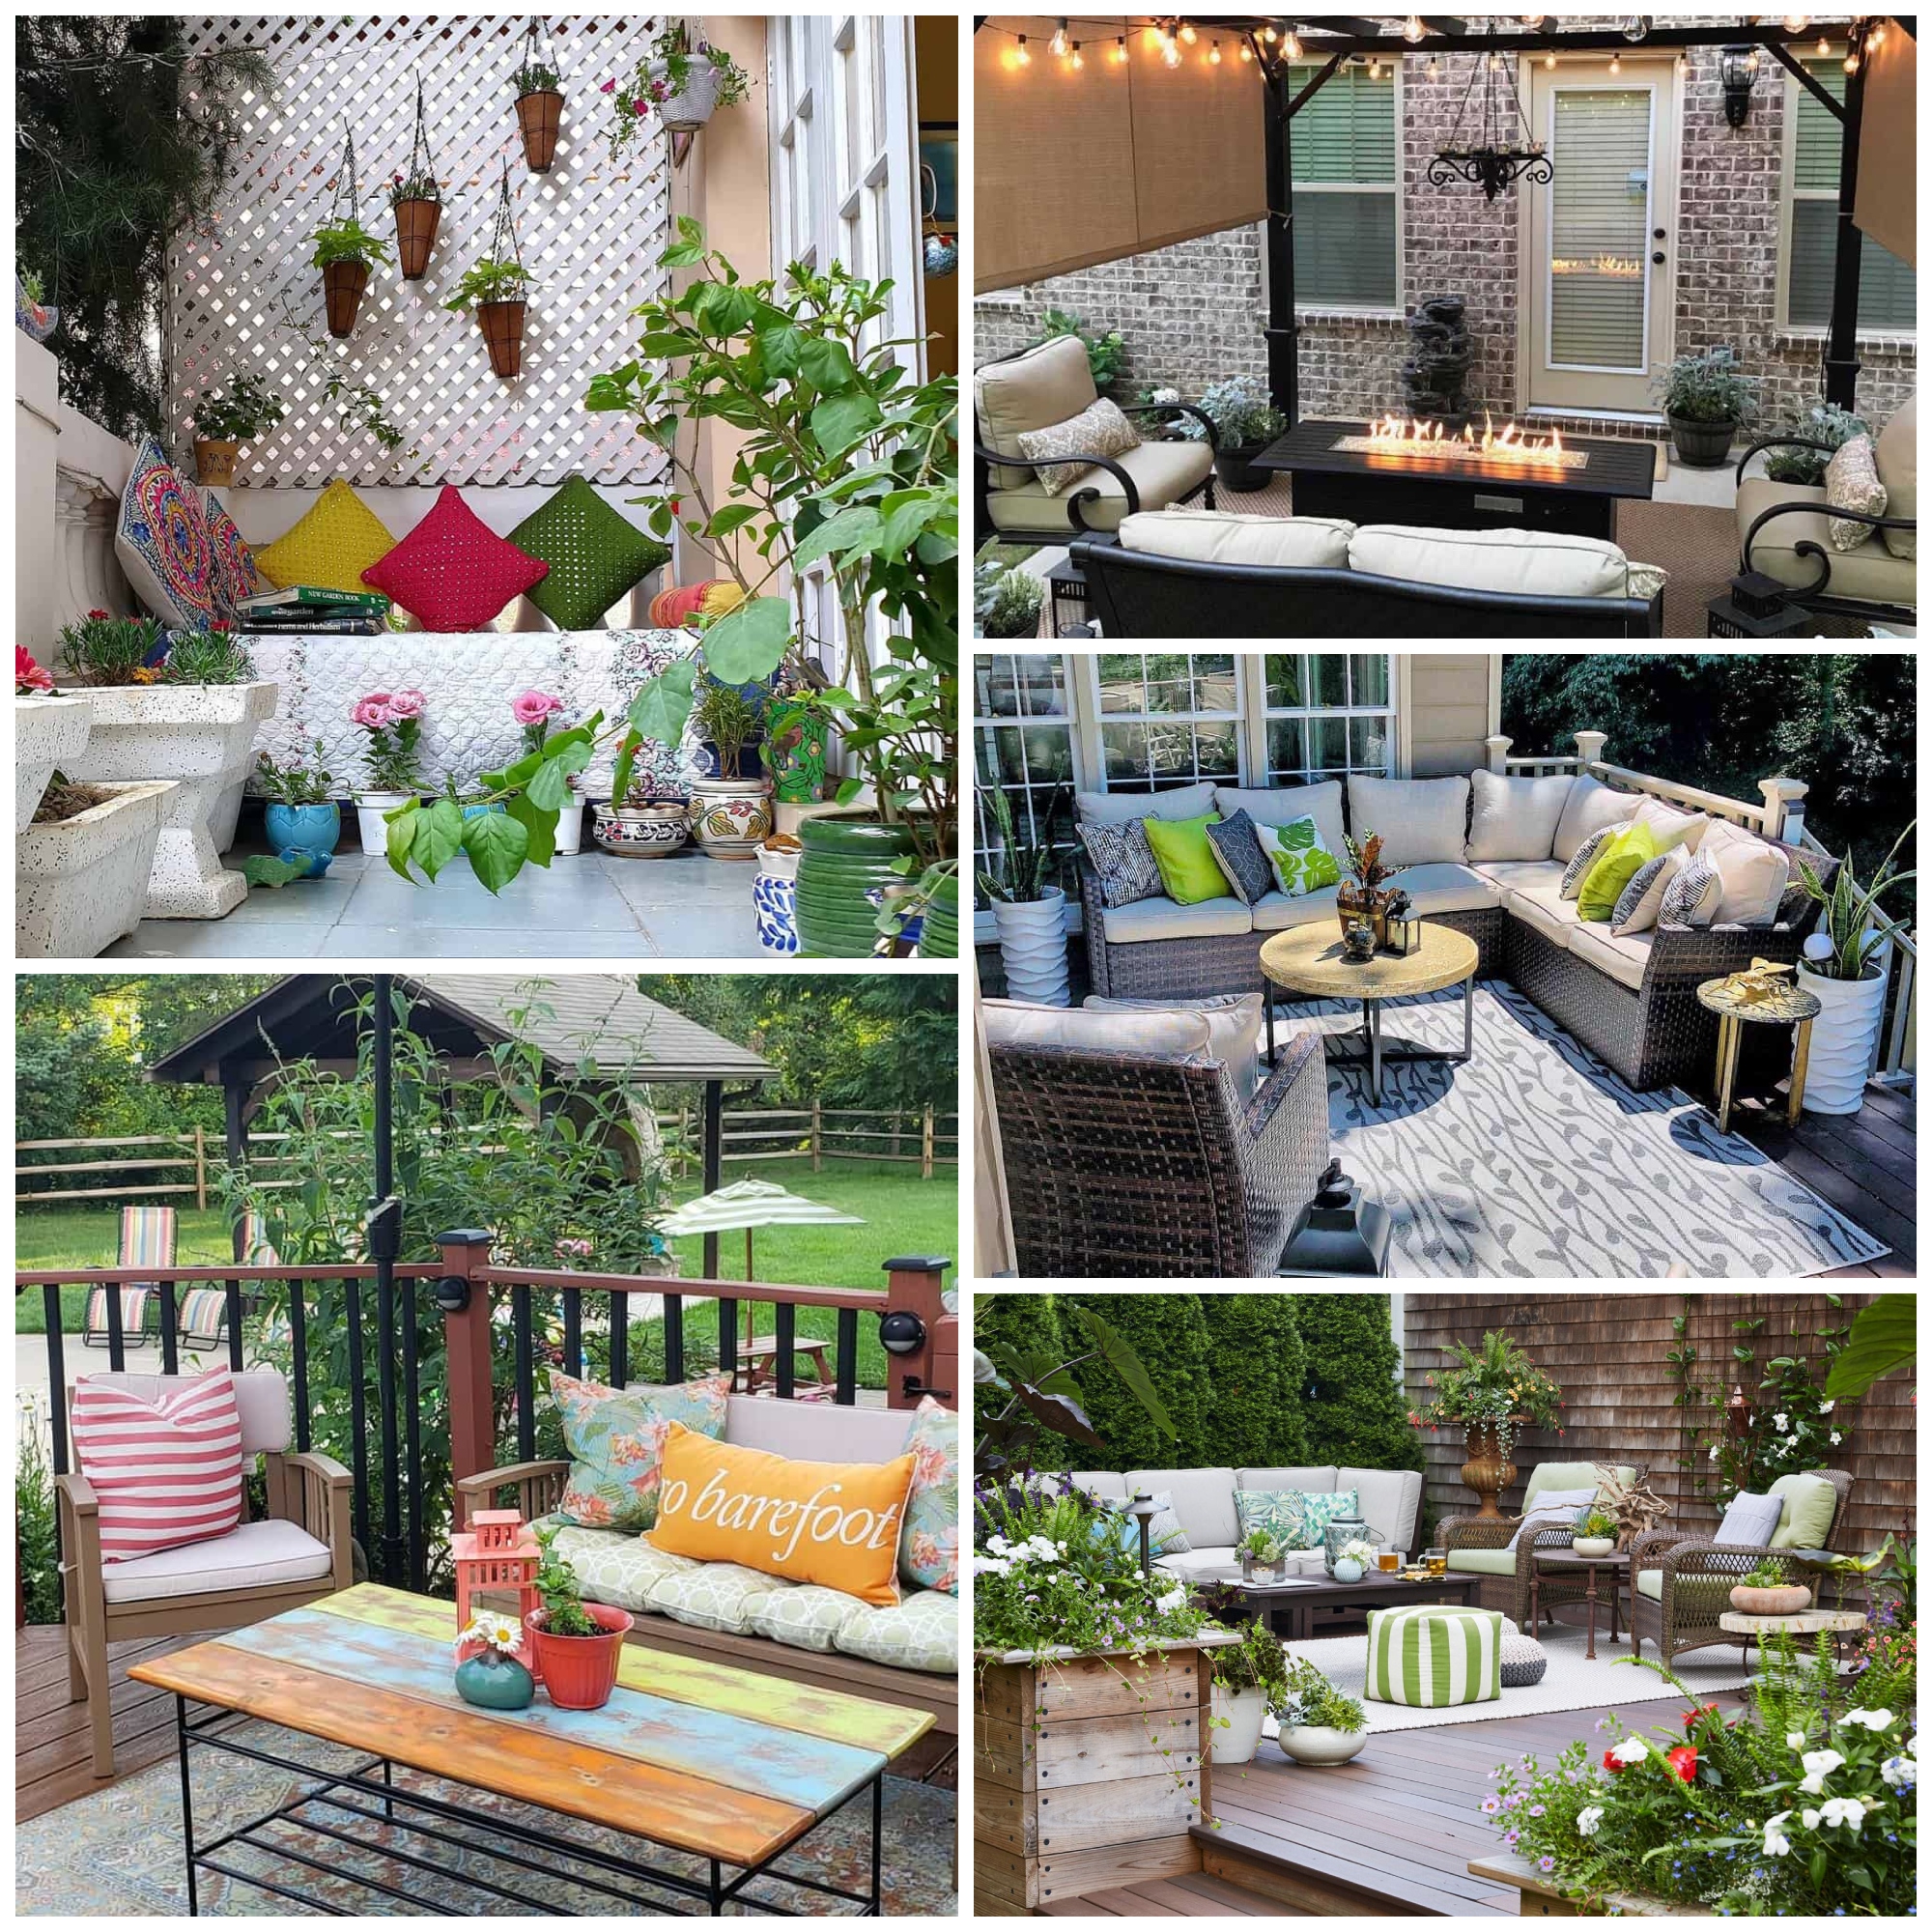 Deck Decorating Ideas You’ll Love For Summer Entertaining